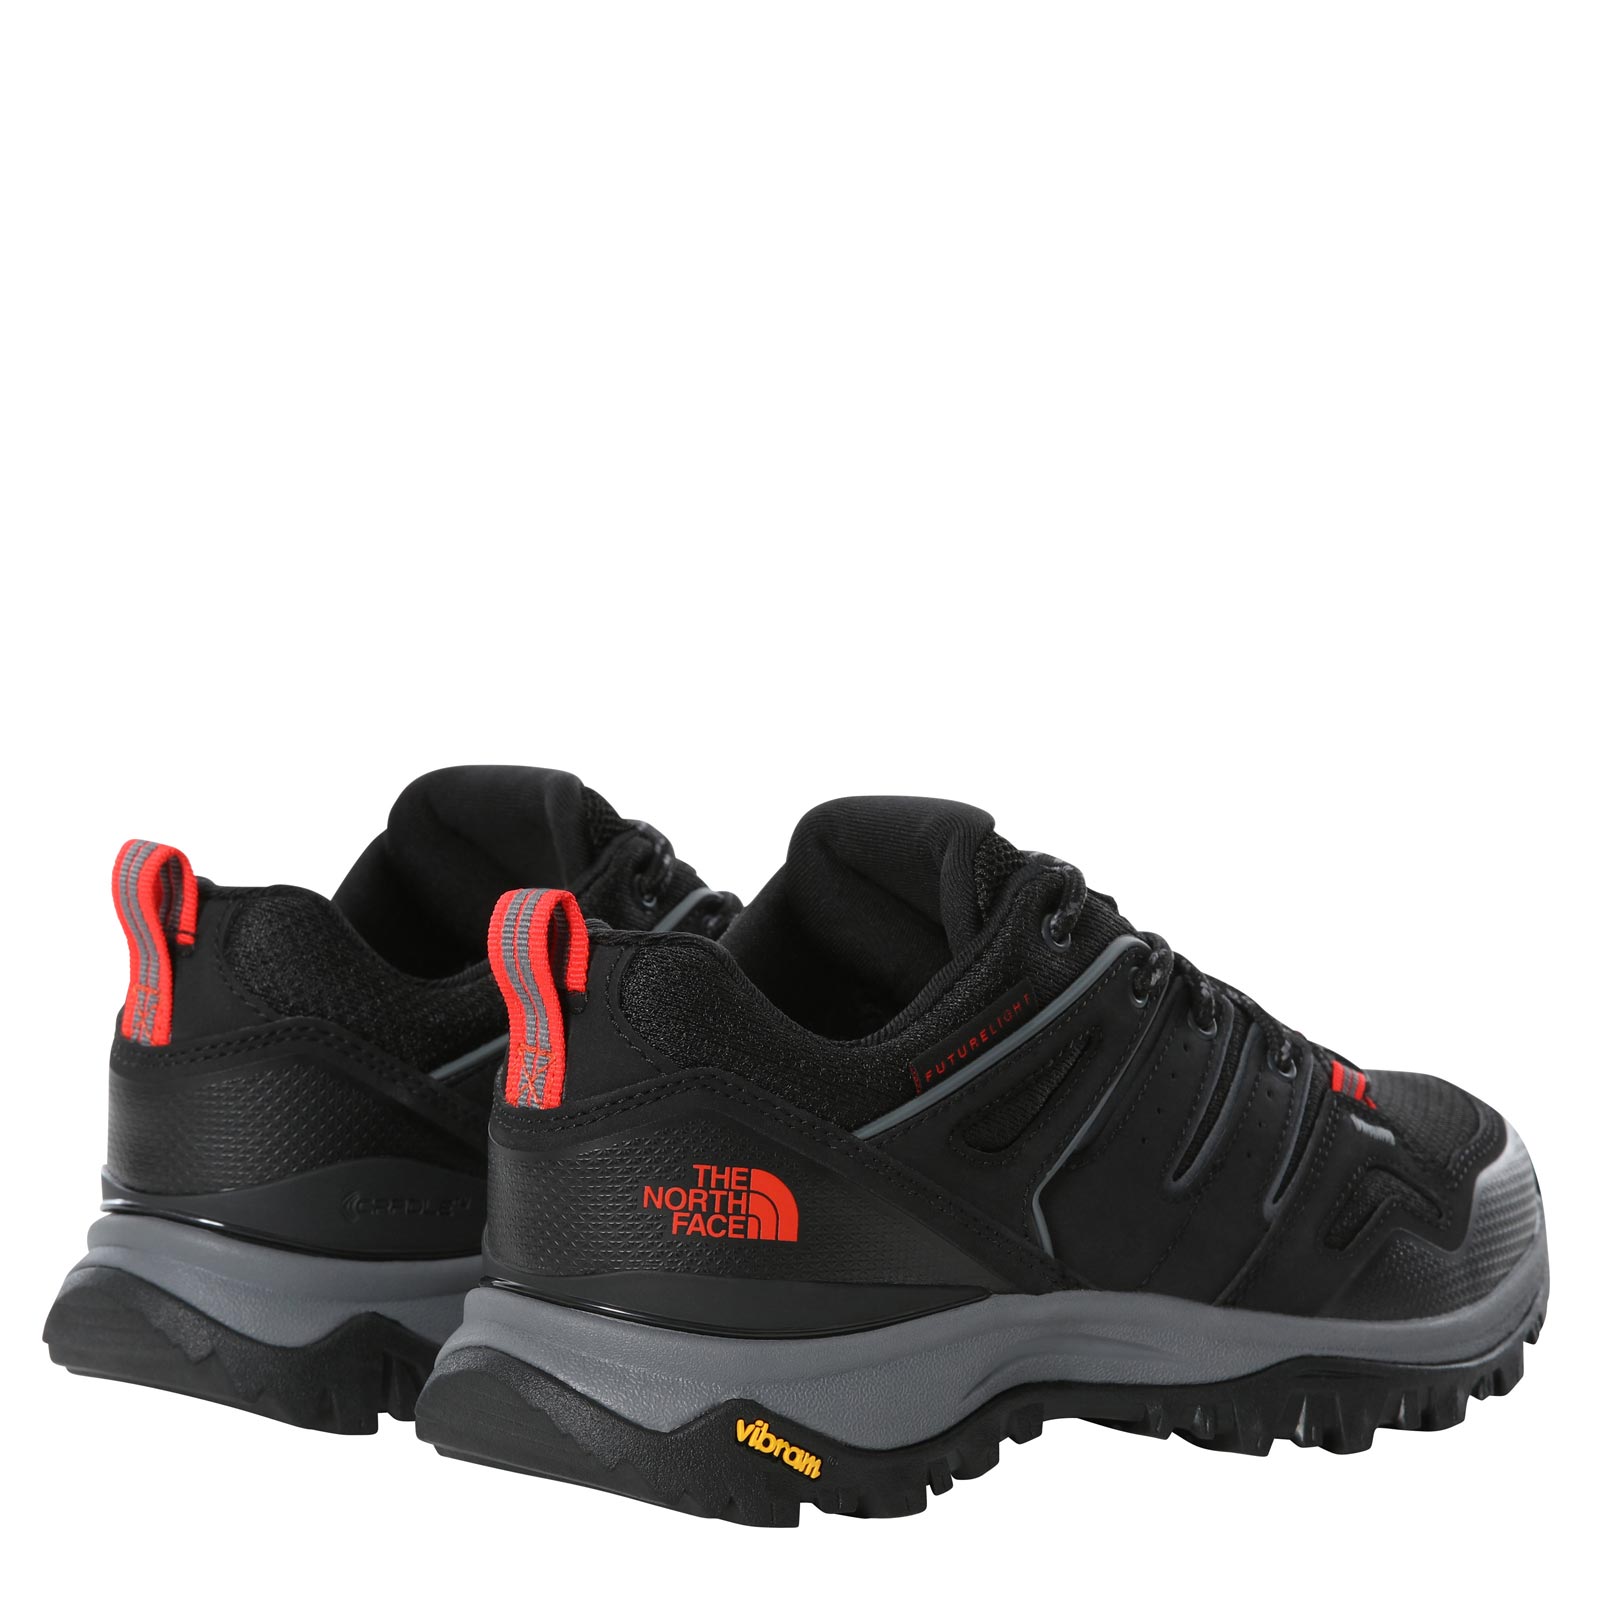 THE NORTH FACE WOMENS HEDGEHOG FUTURELIGHT™ HIKING SHOES